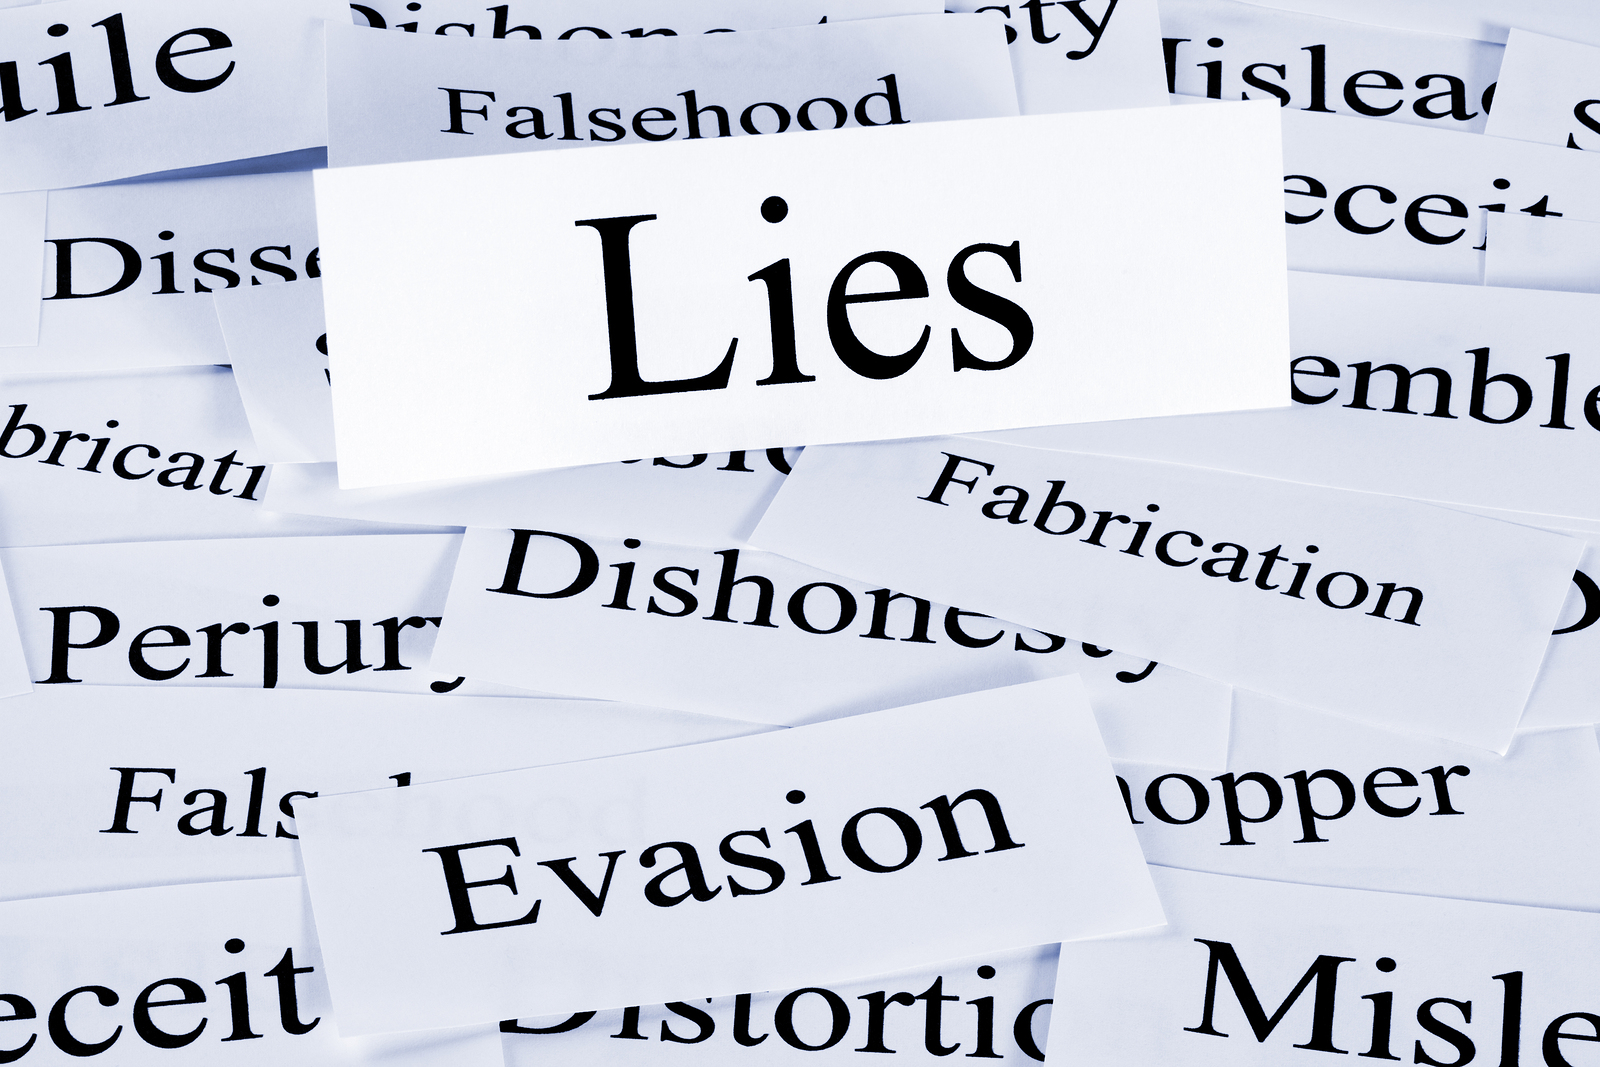 How frequent are false allegations?